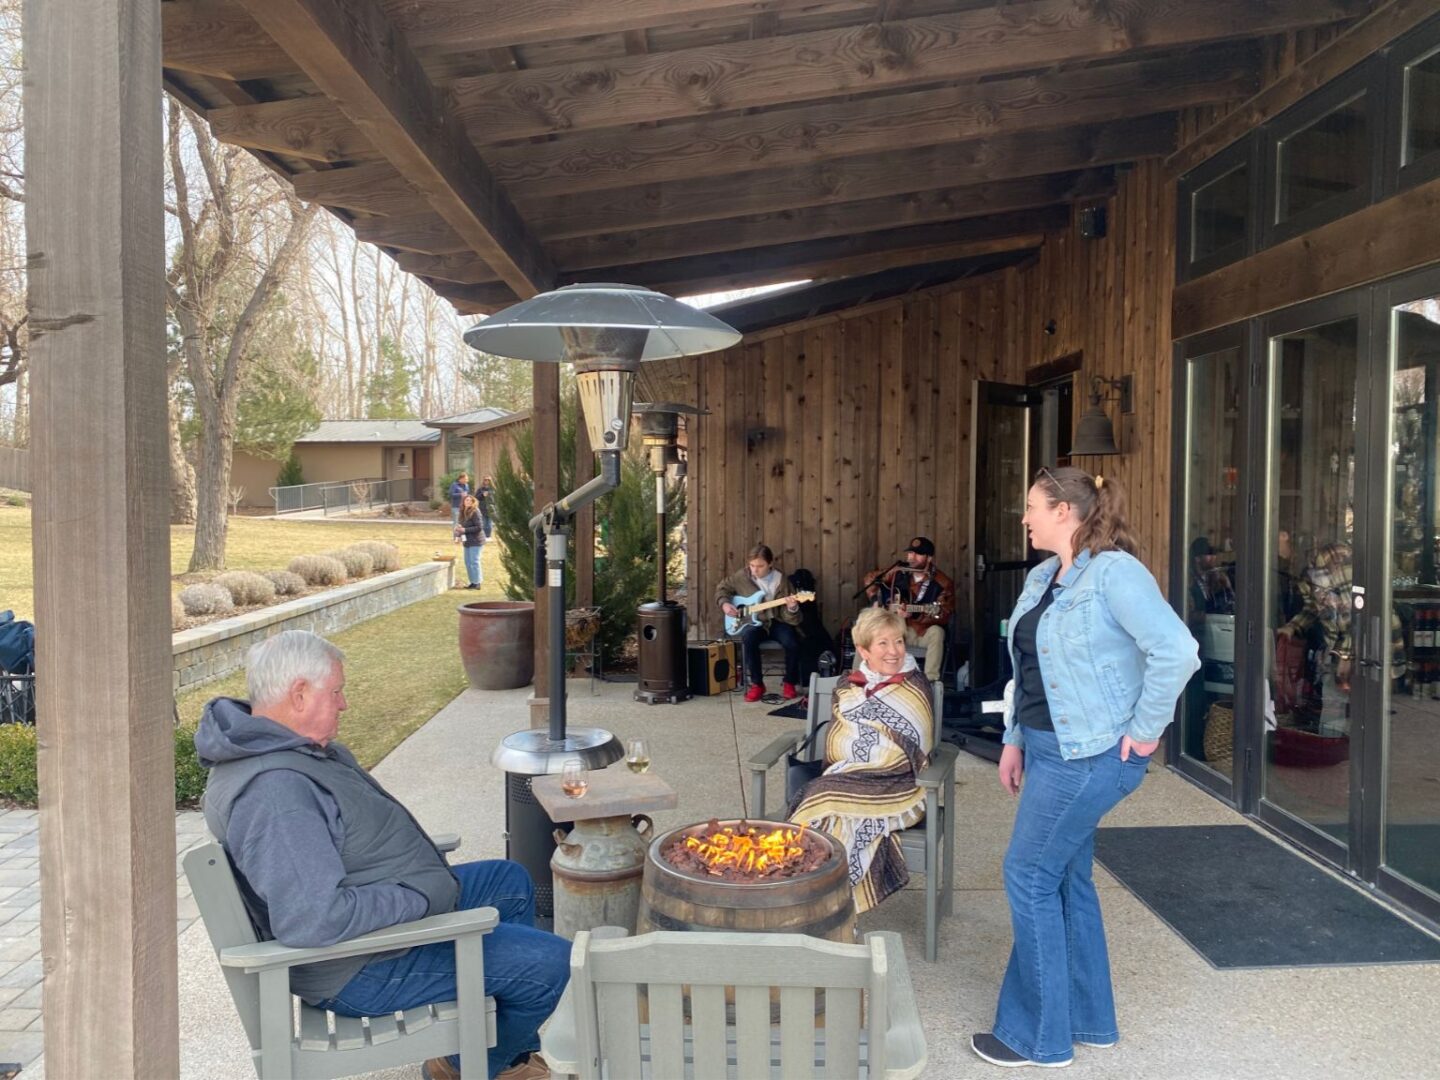 several people interacting in an outdoor space at a winery with chairs and a fire barrel